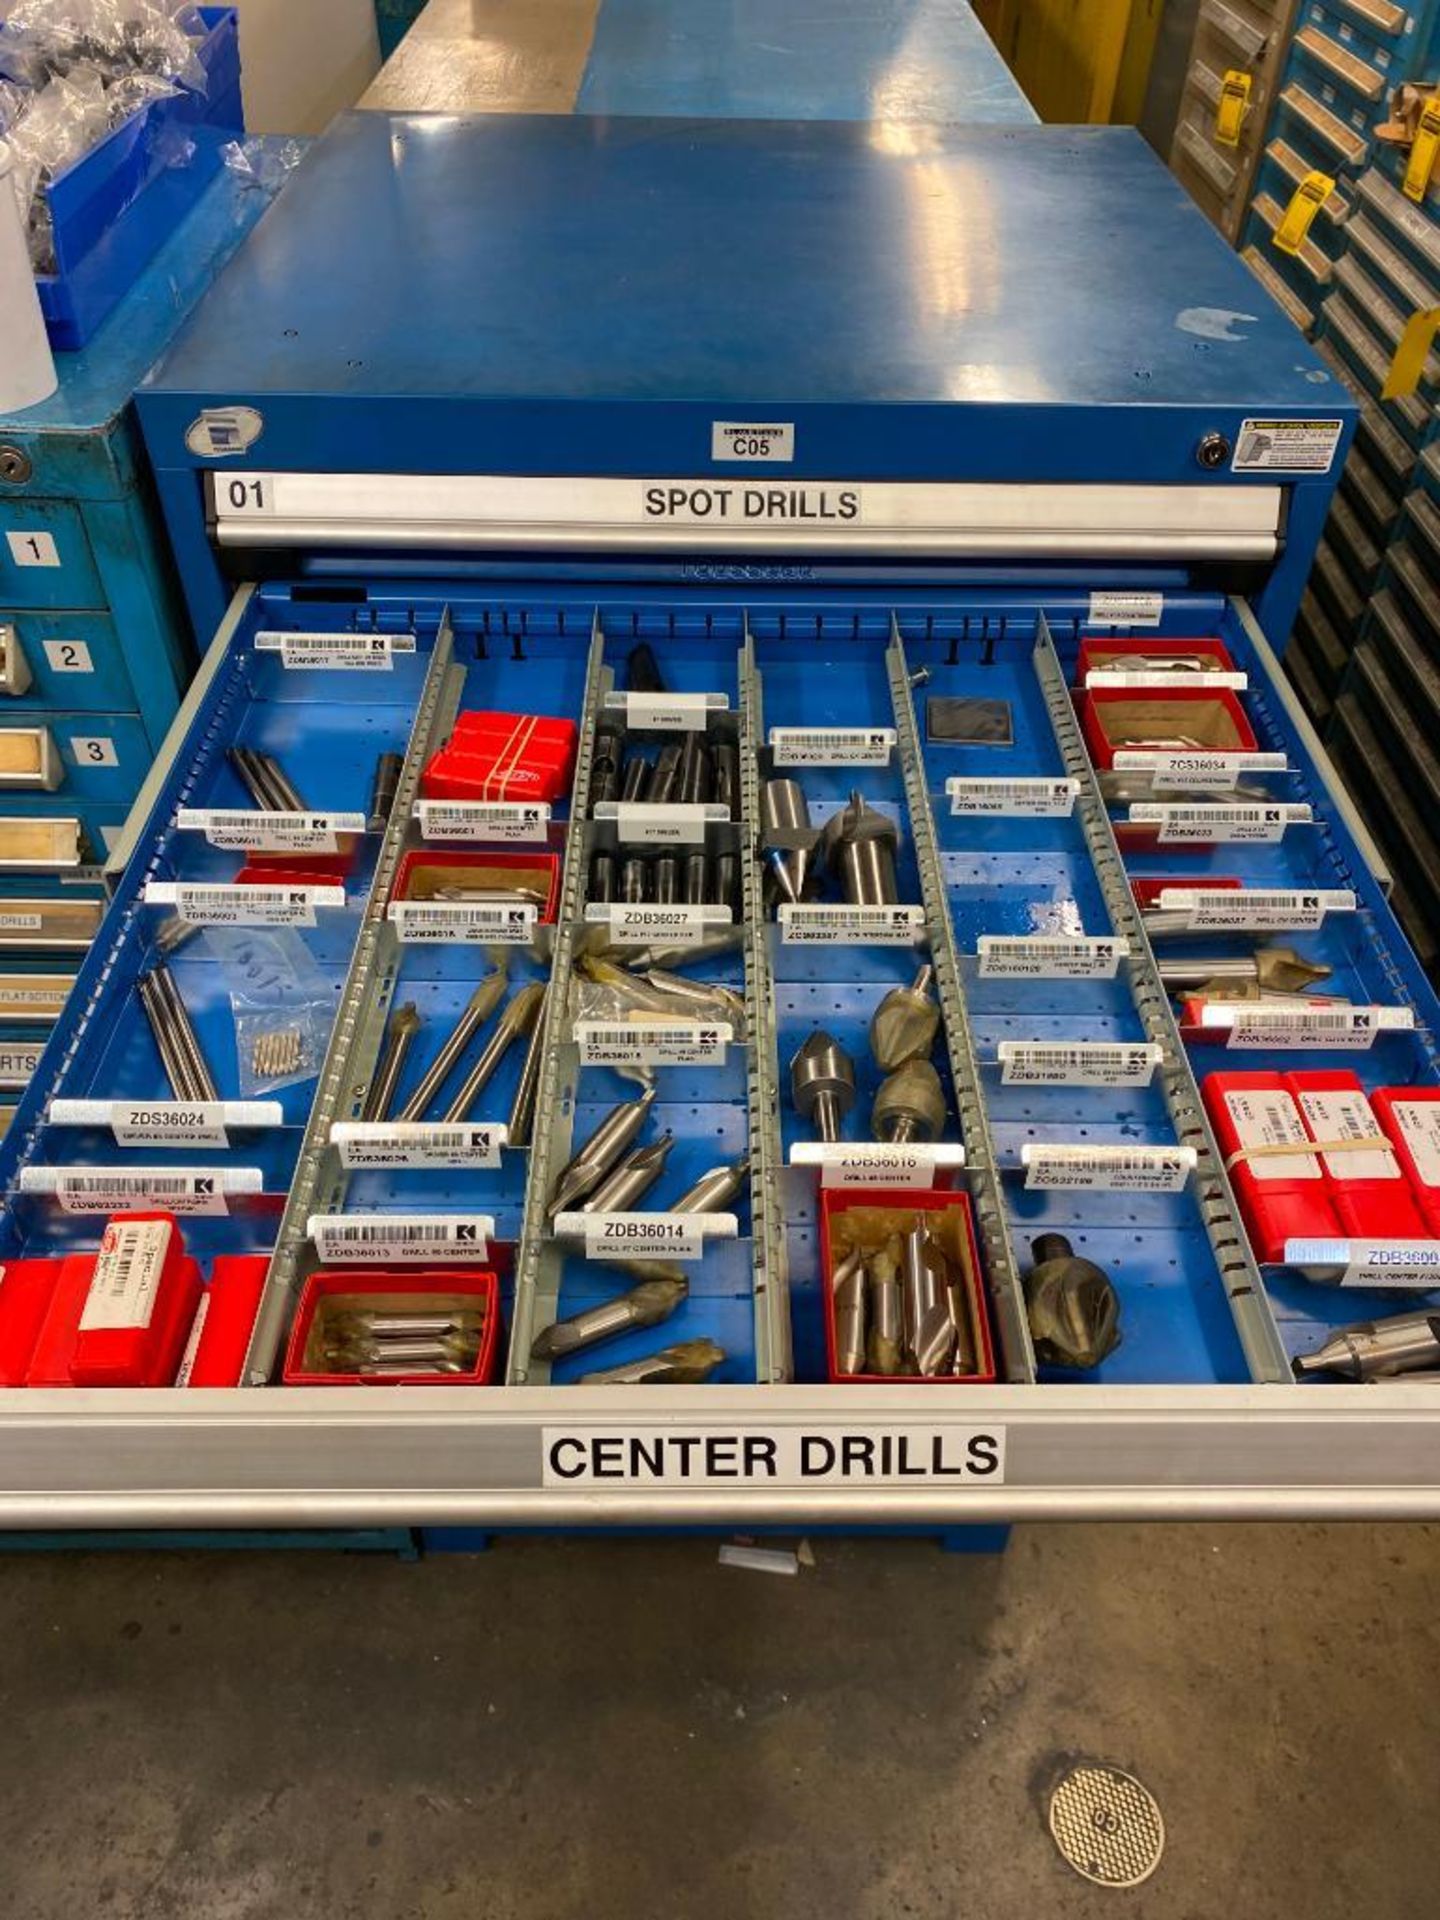 VIDMAR CABINET AND CONTENTS OF ASSORTED SPOT DRILLS, CENTER DRILLS, OAL DRILLS AND INSERTS - Image 3 of 15